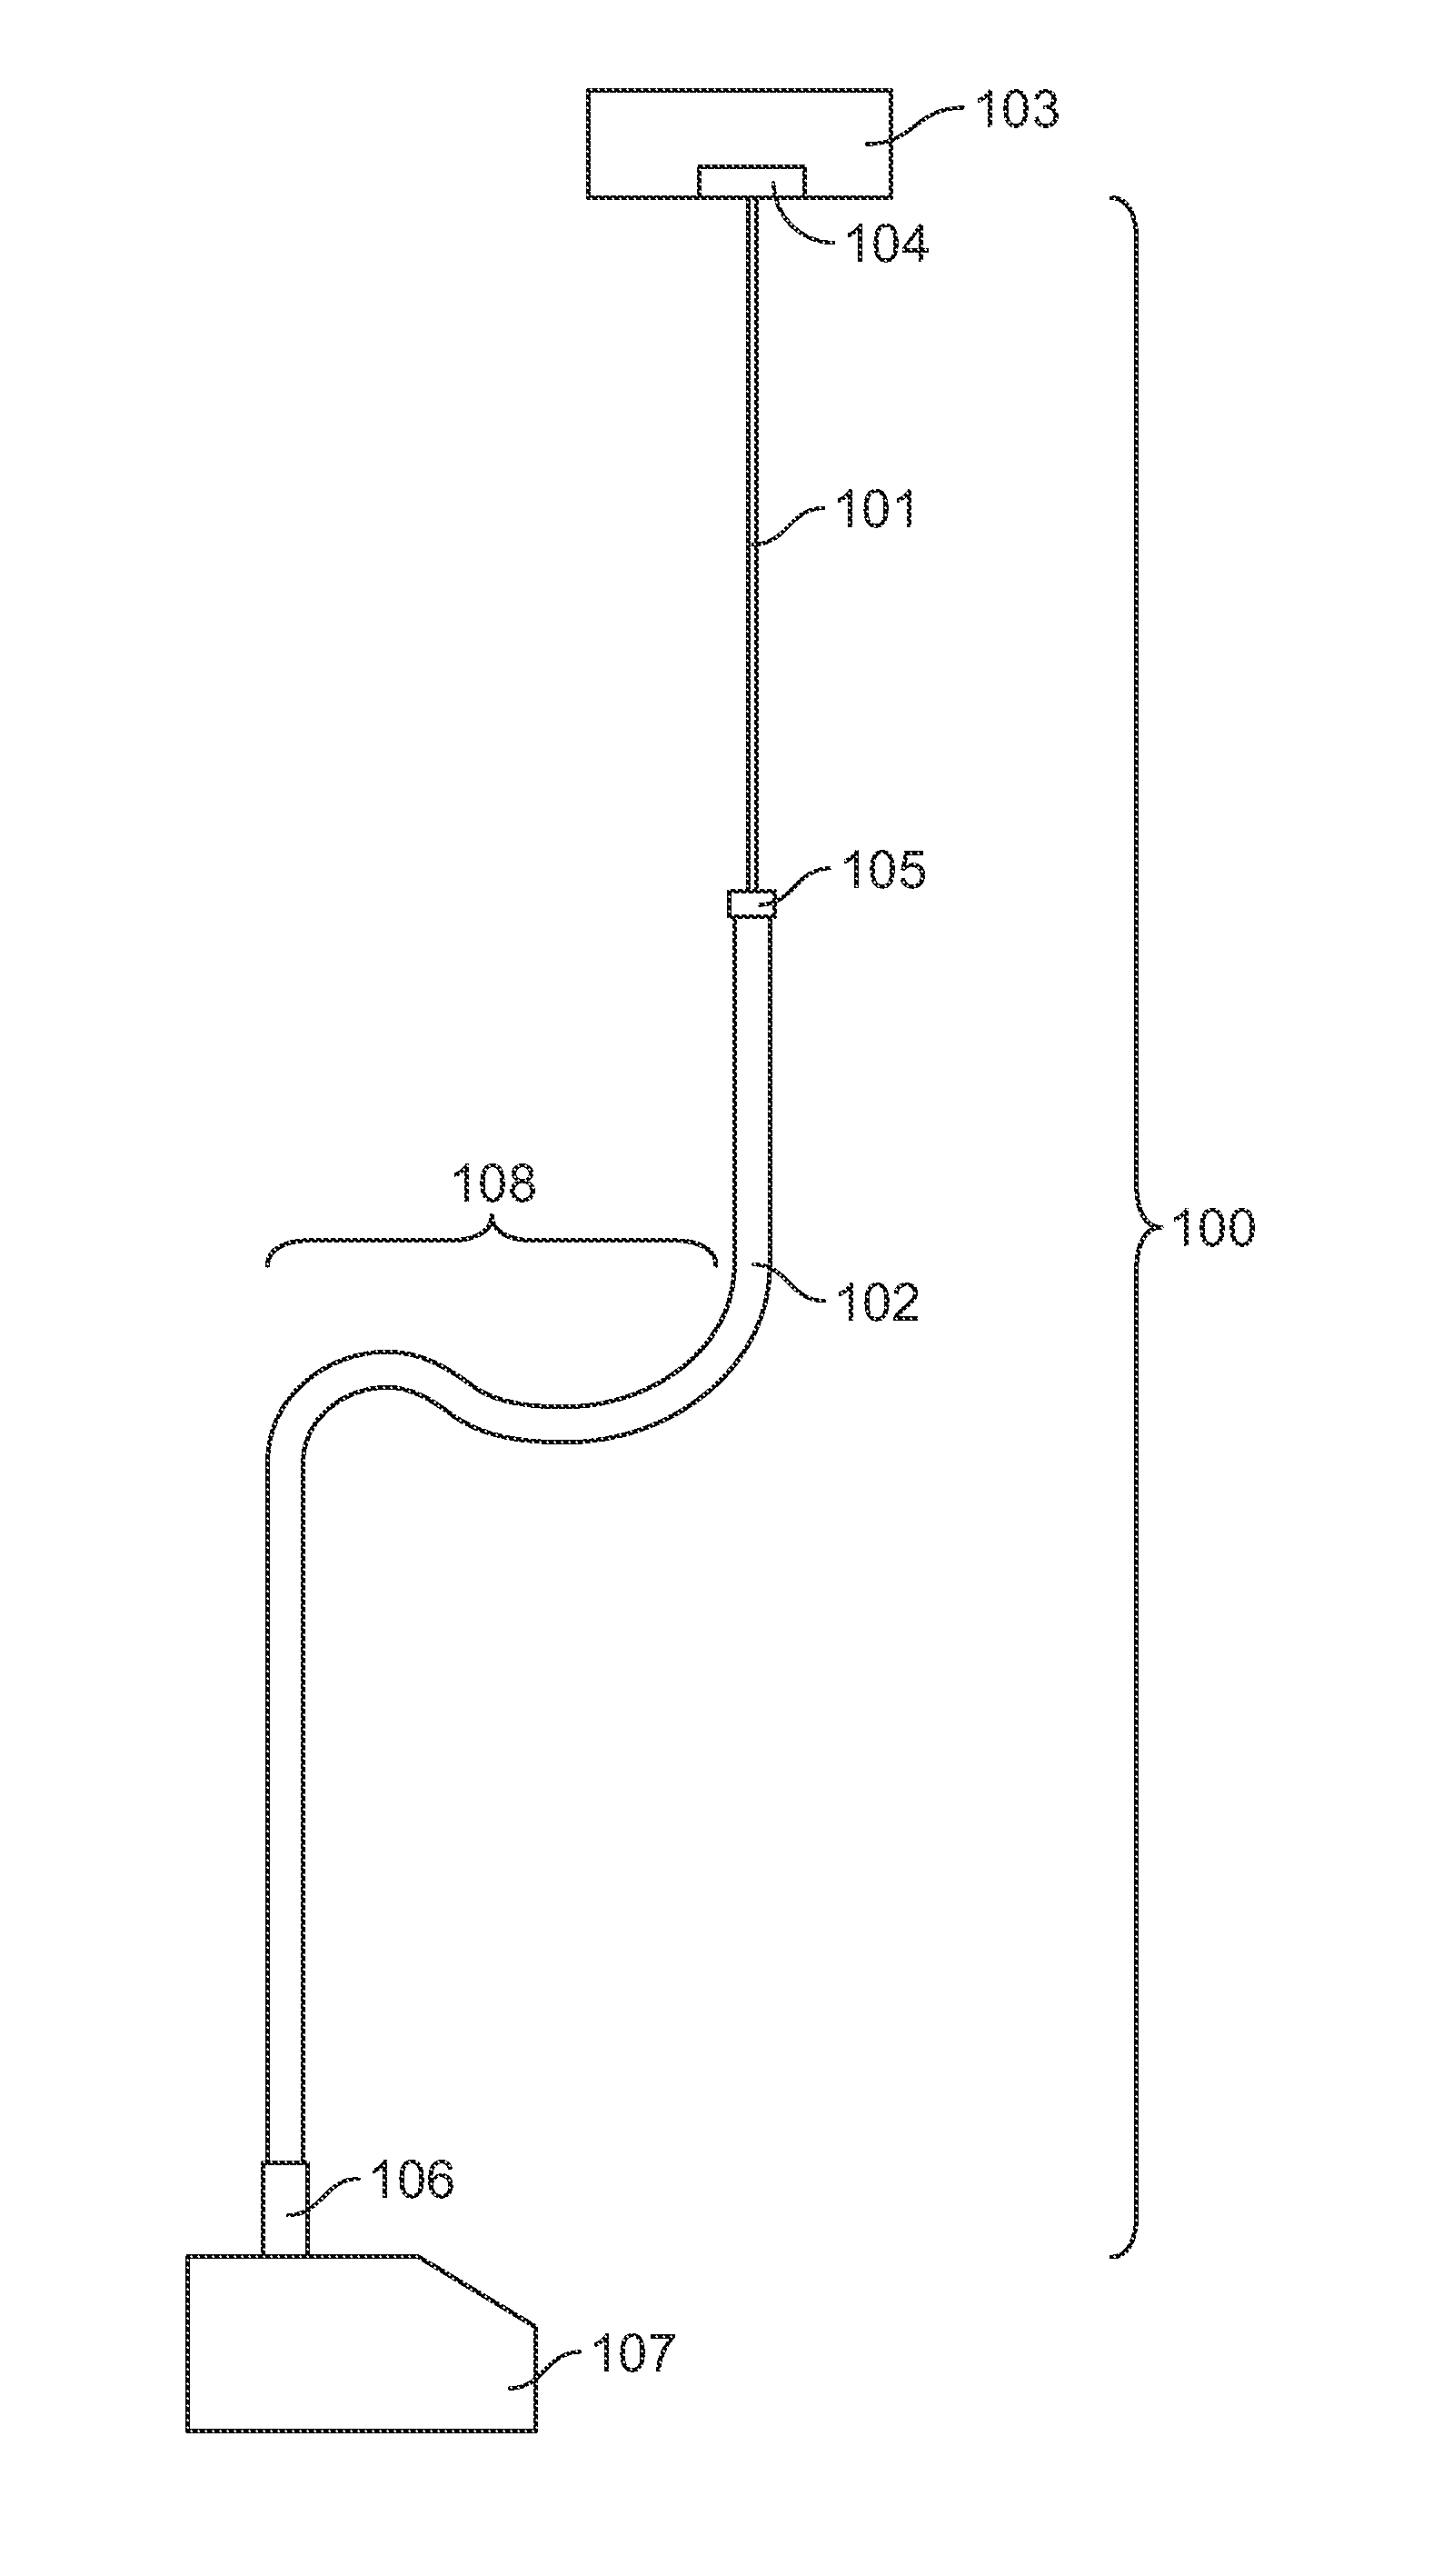 Mechanical tether system for a submersible vehicle